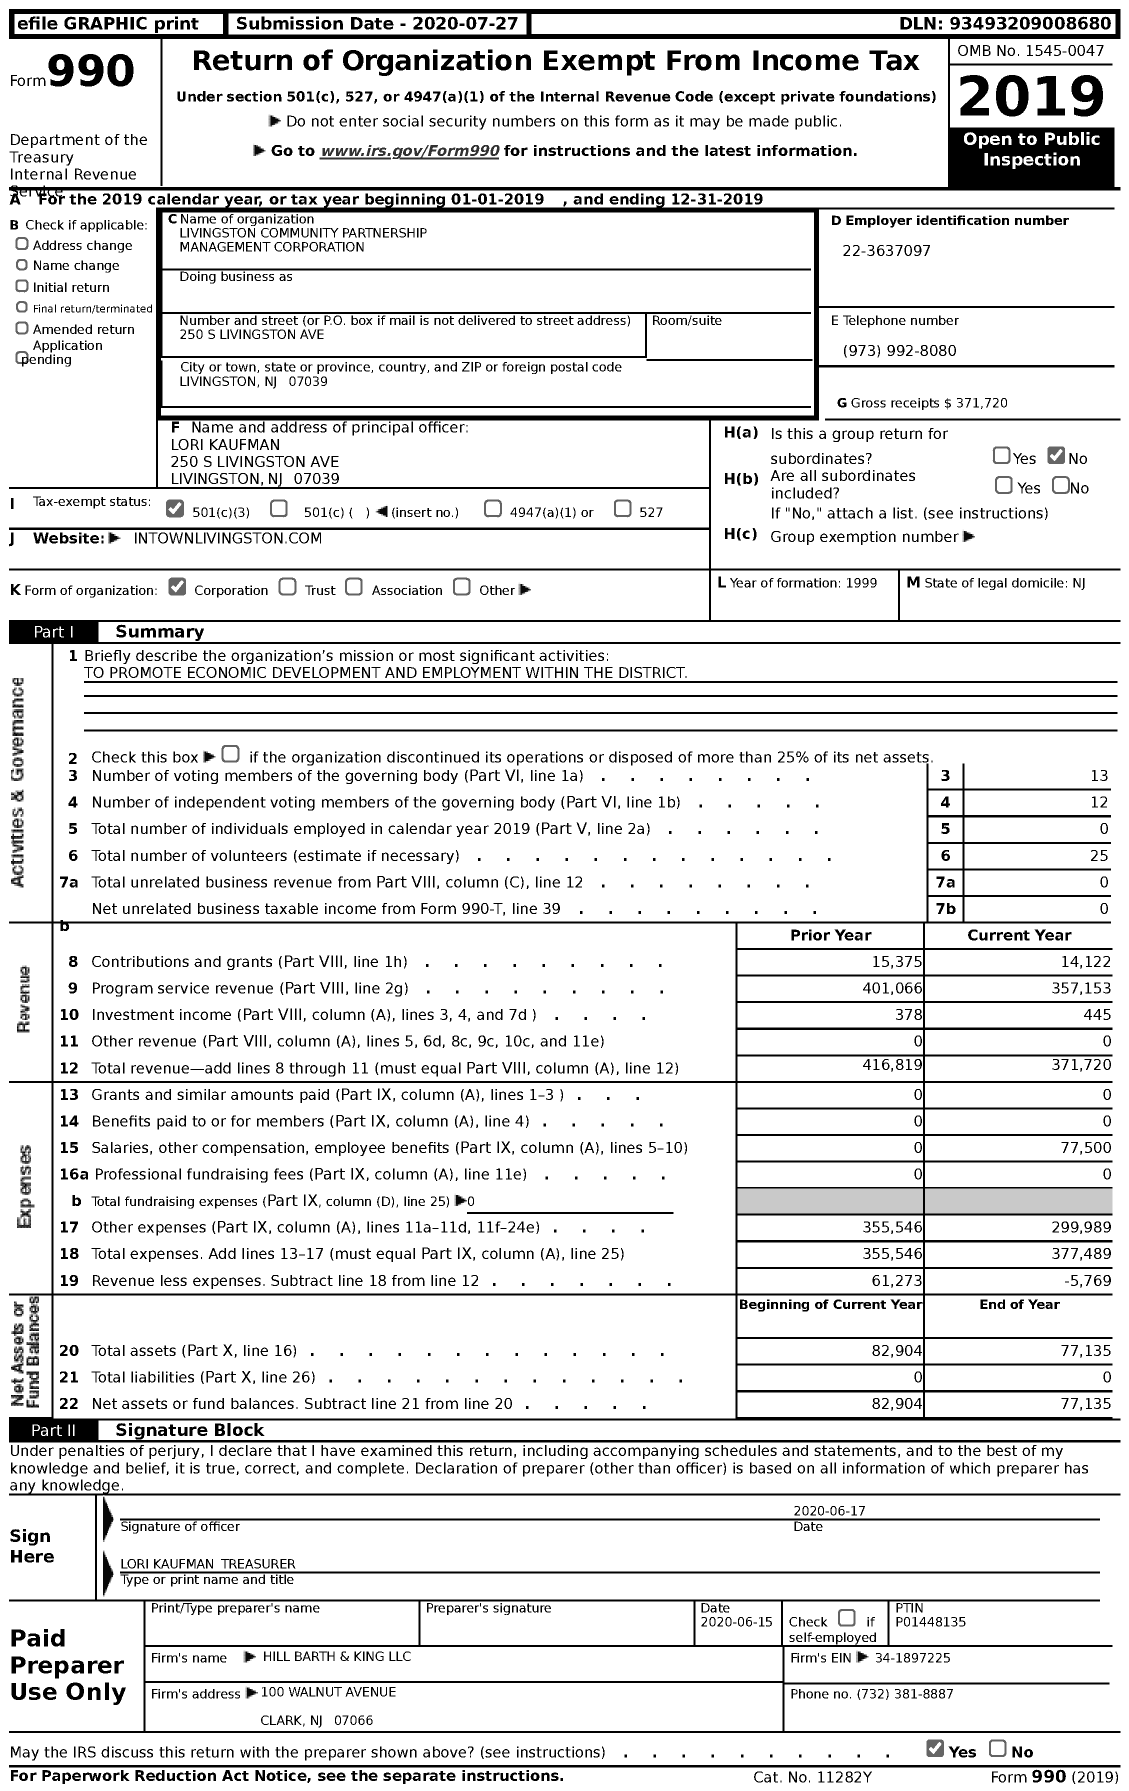 Image of first page of 2019 Form 990 for Livingston Community Partnership Management Corporation